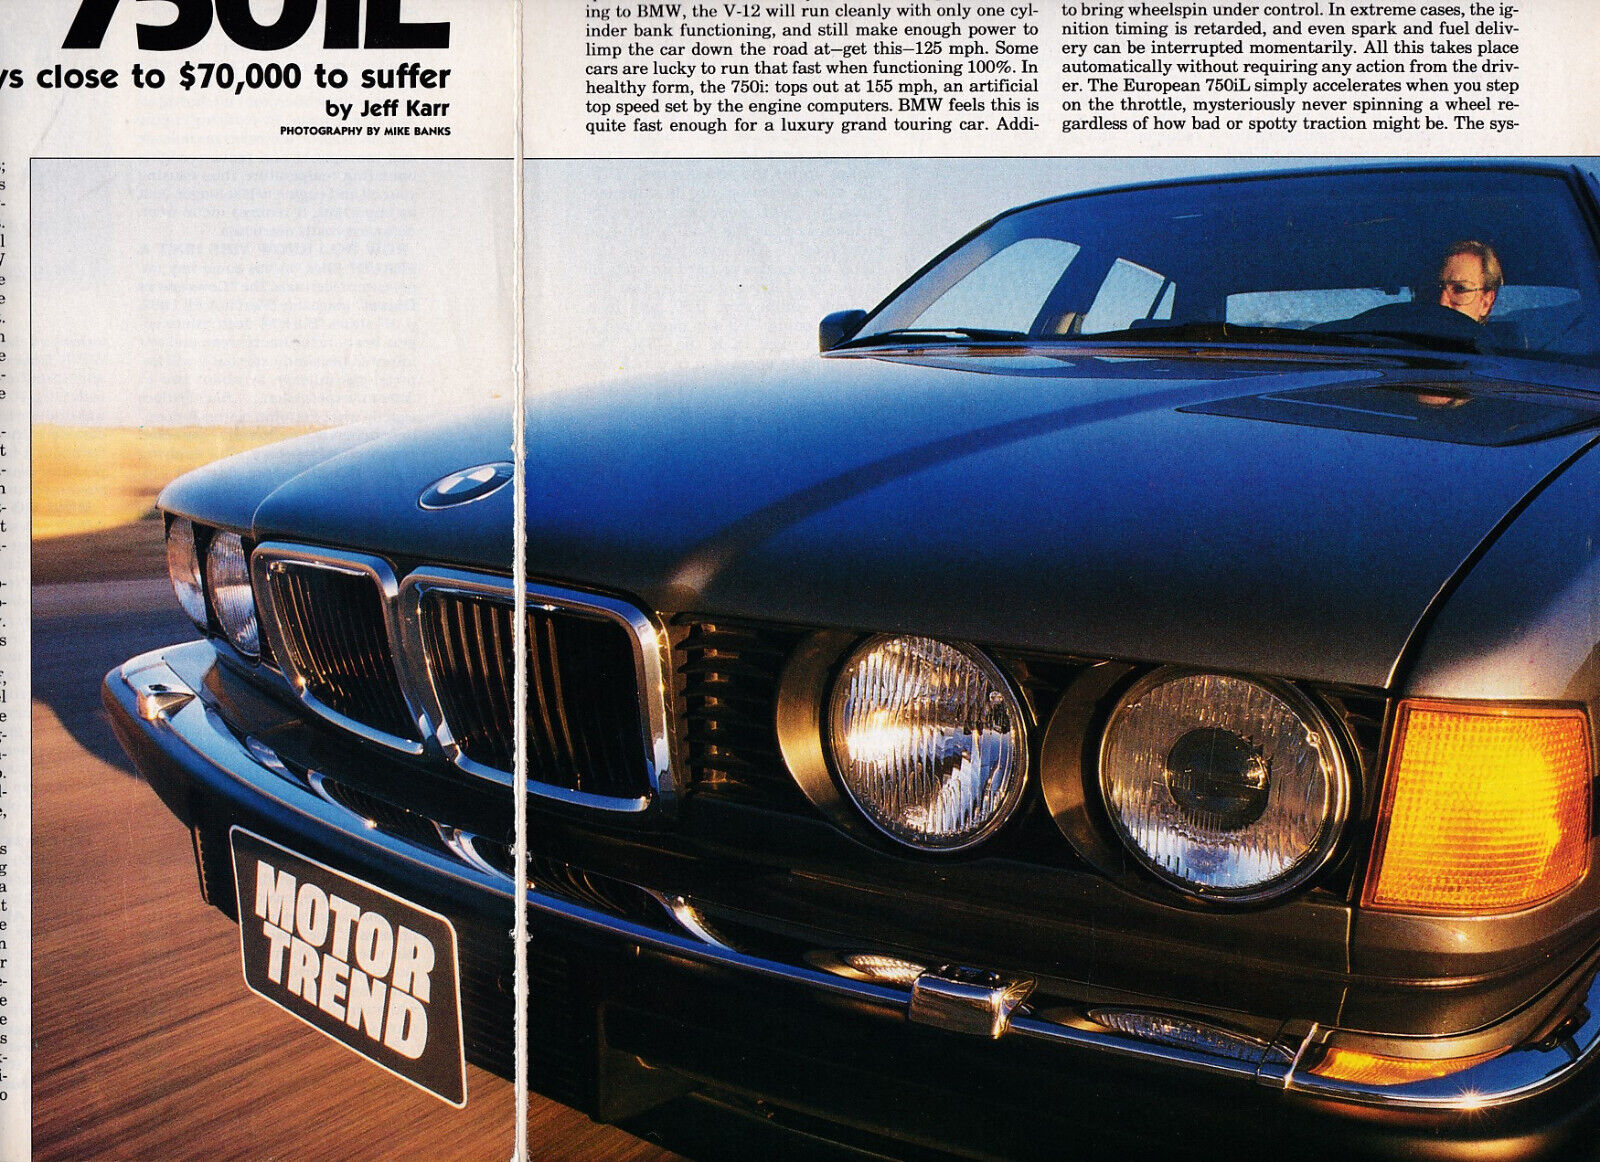 1988 Bmw 750 Il Sedan, 5 Litre V-12, 300 Hp, 4-speed Automatic, Detailed Test